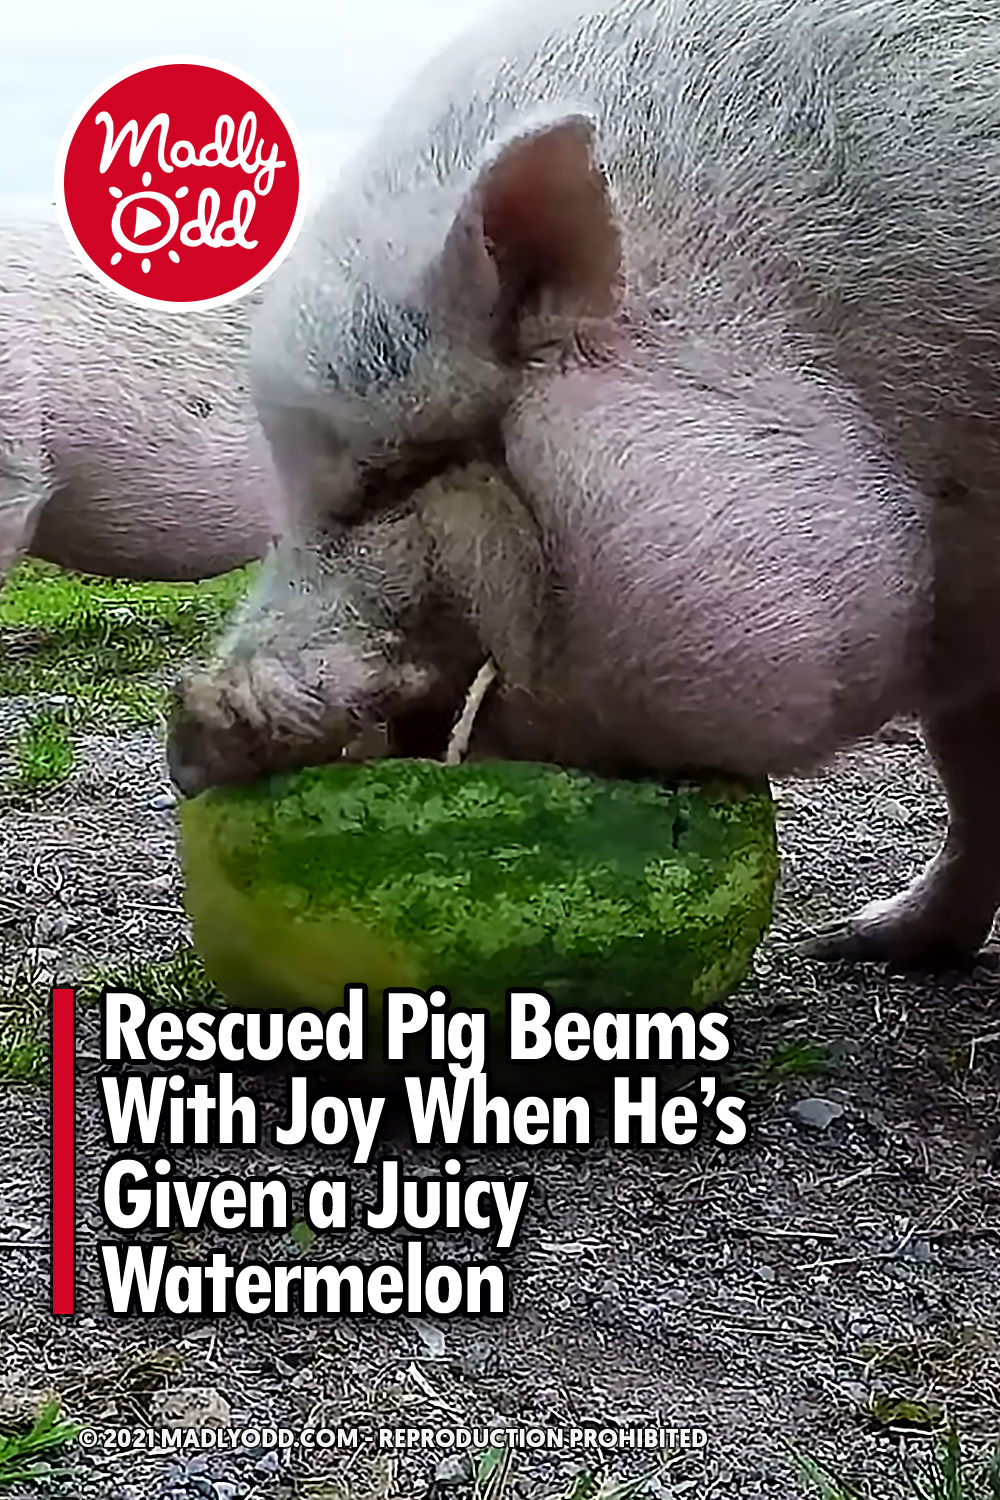 Rescued Pig Beams With Joy When He’s Given a Juicy Watermelon